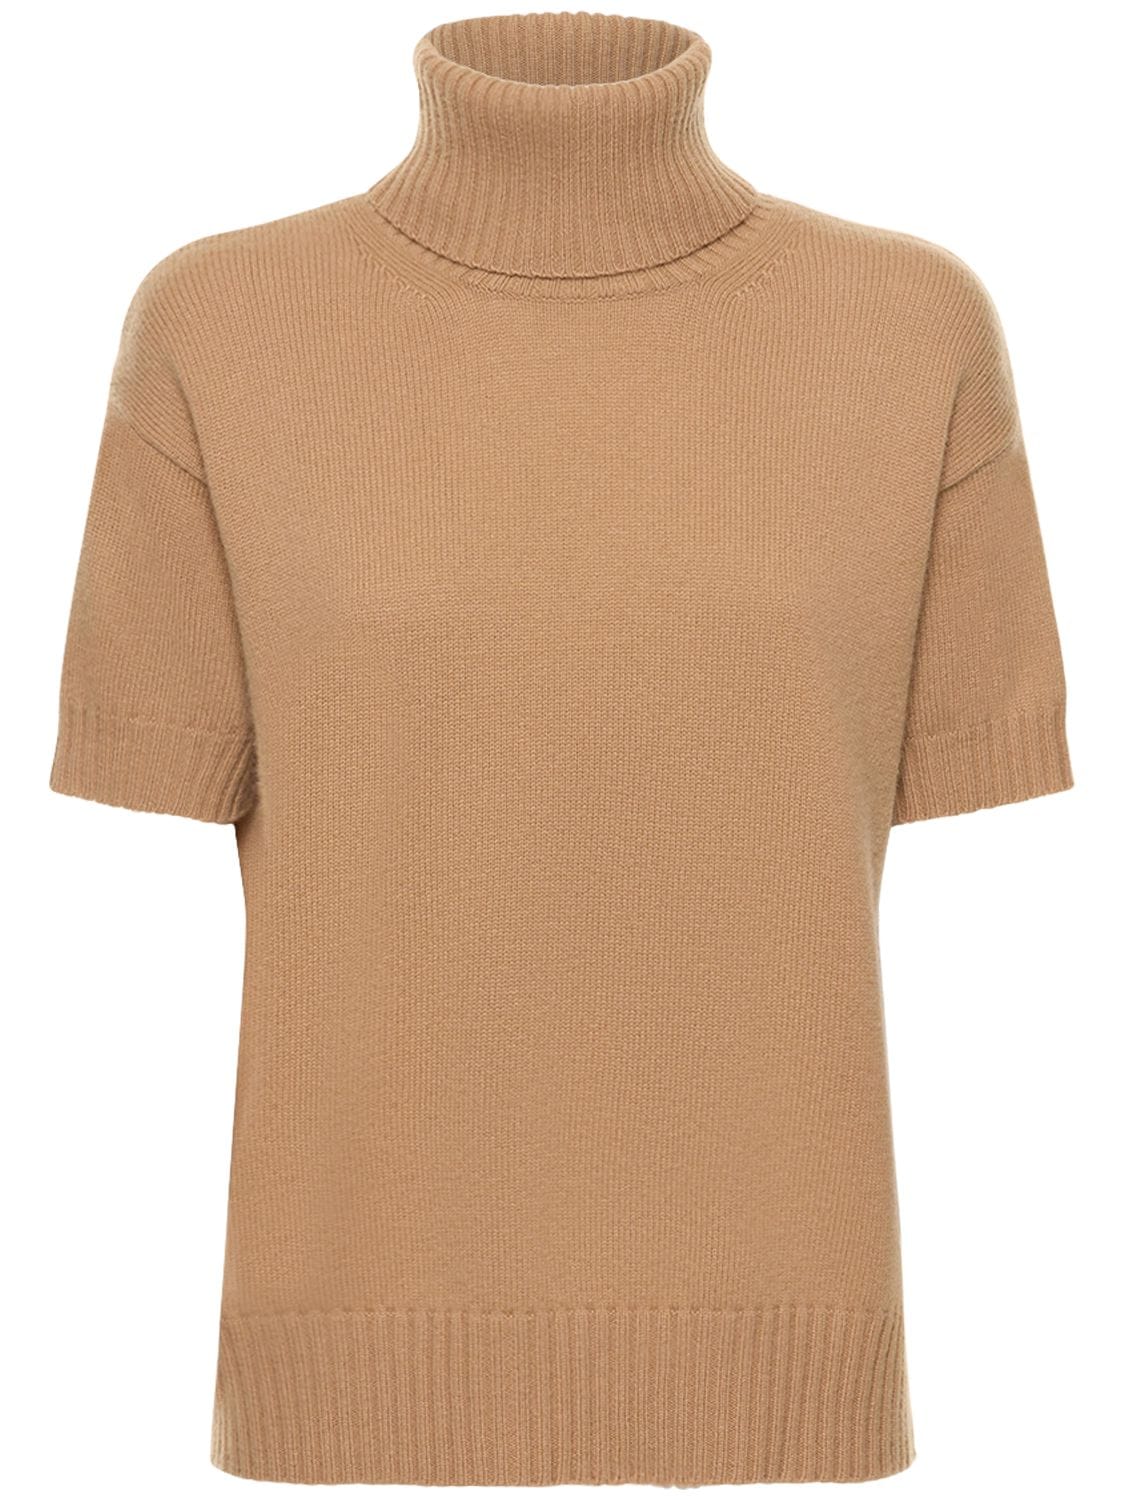 Max Mara Lvr Exclusive Wool & Cashmere Top In Camel